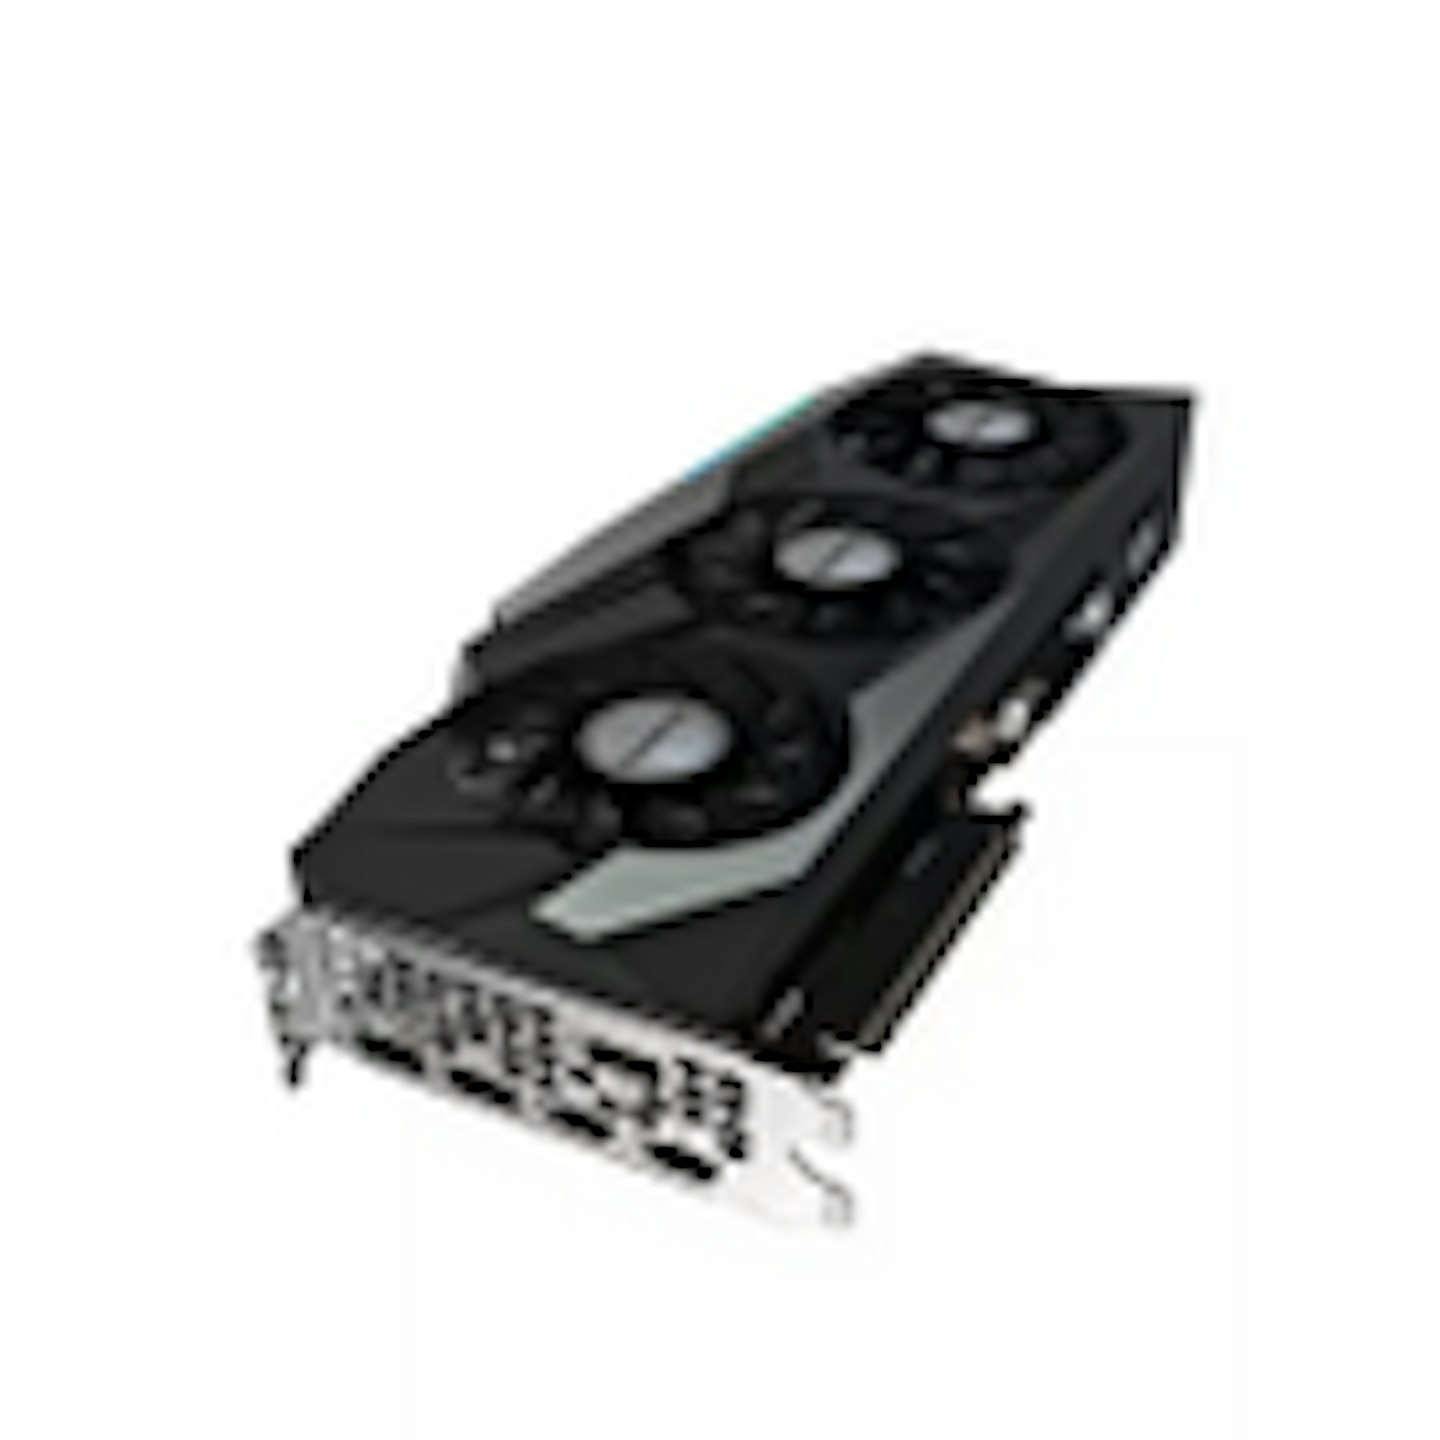 A GeForce RTX 3090 graphics card